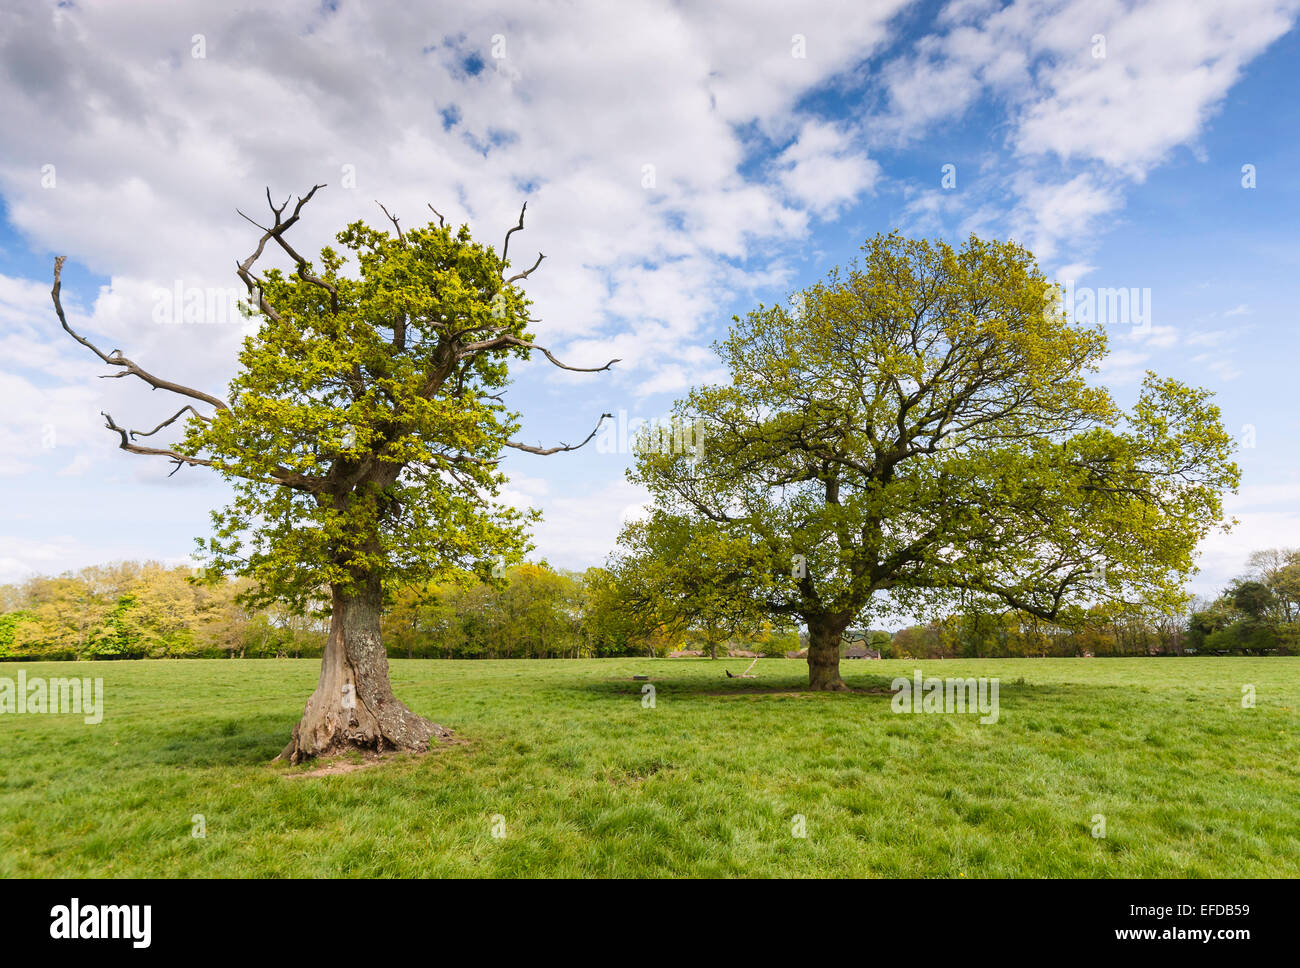 Two Oak trees in Spring, one damaged and old, the other younger, stand in a field with blue sky and light clouds Stock Photo